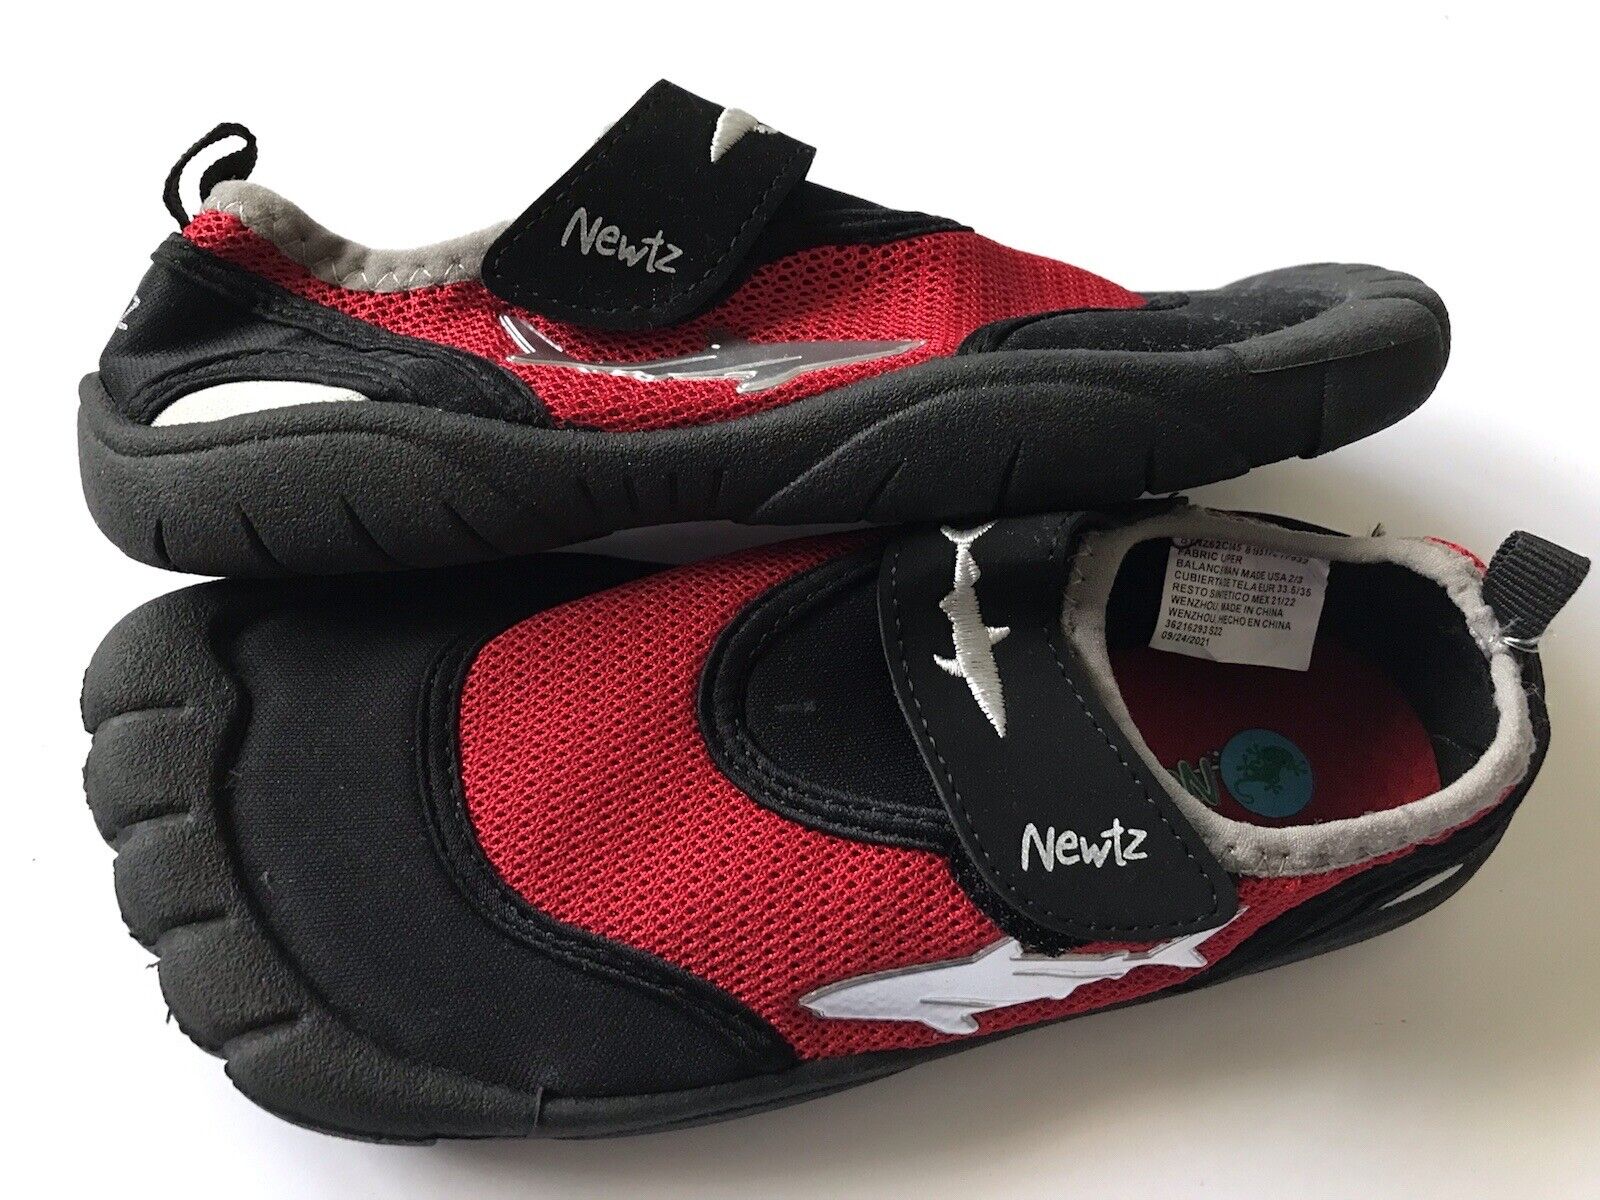 Newtz Boy’s U.s. Youth Size (2/3) Black & Red Water Shoes With Toe Bumpers Nwob